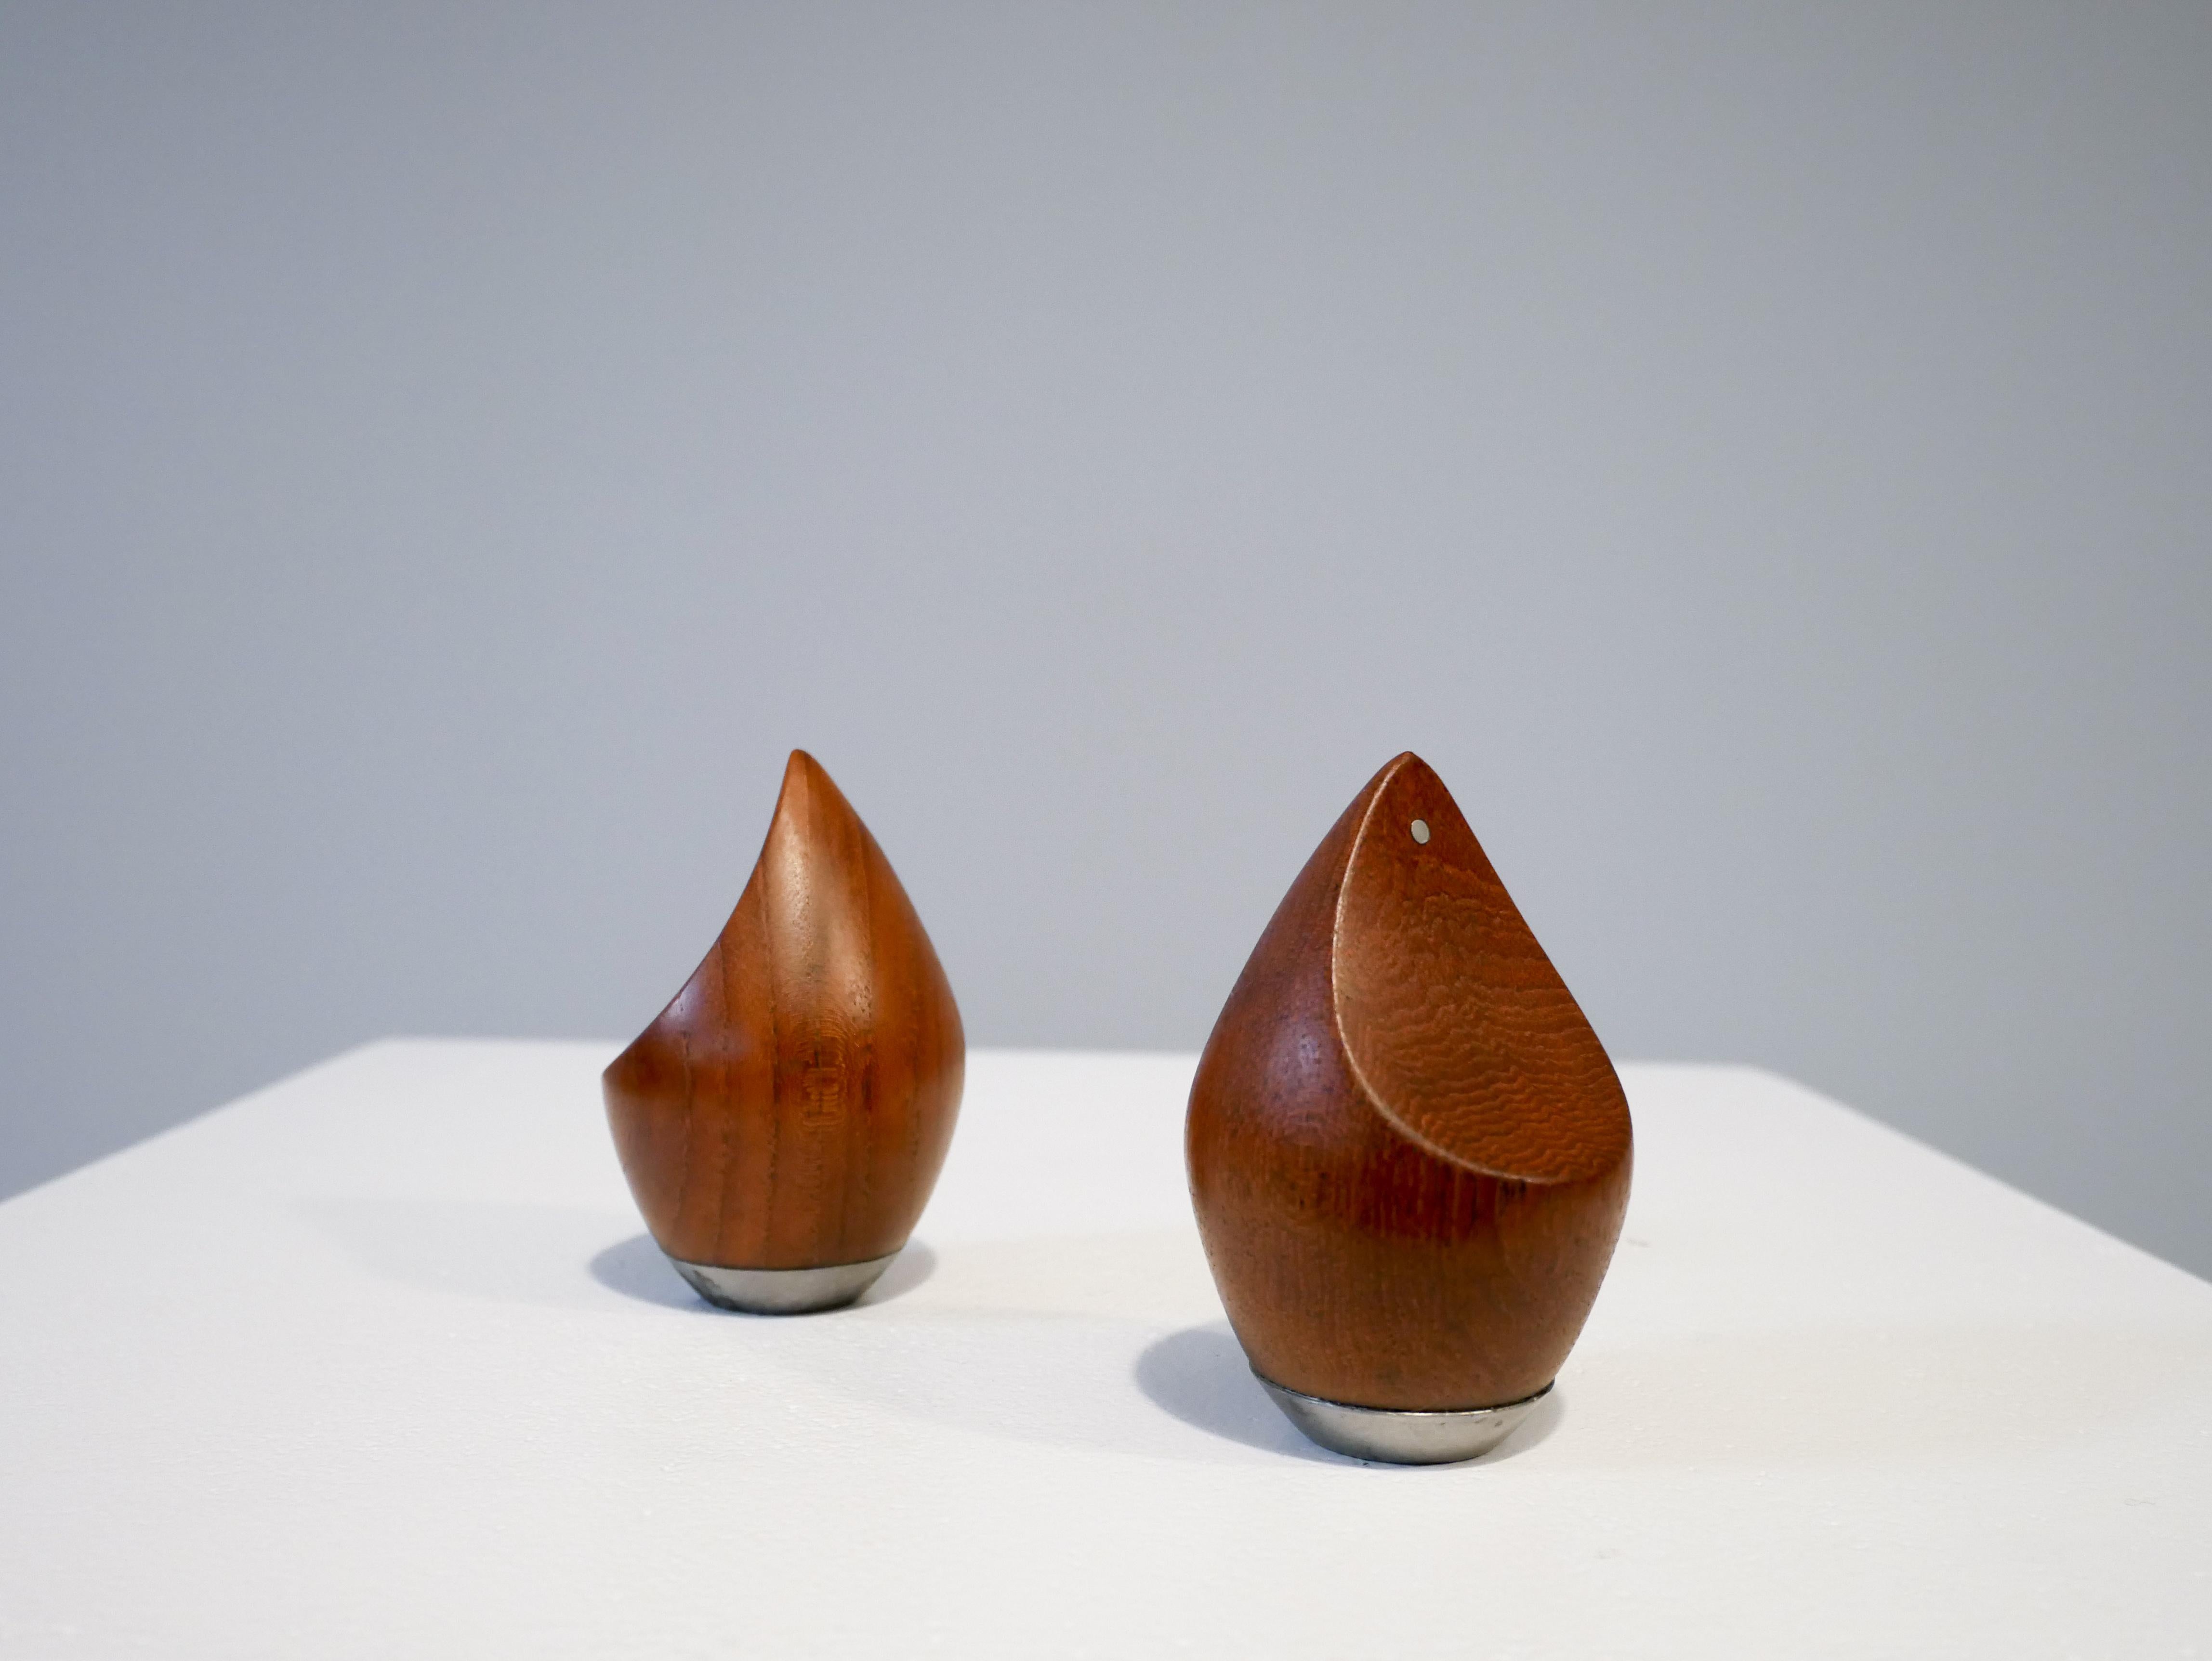 Rare set of a PJØ form salt and pepper Shaker set. The shakers have a patented way off distribution.
Made in Denmark, 1950s. Teak and stainless steel.